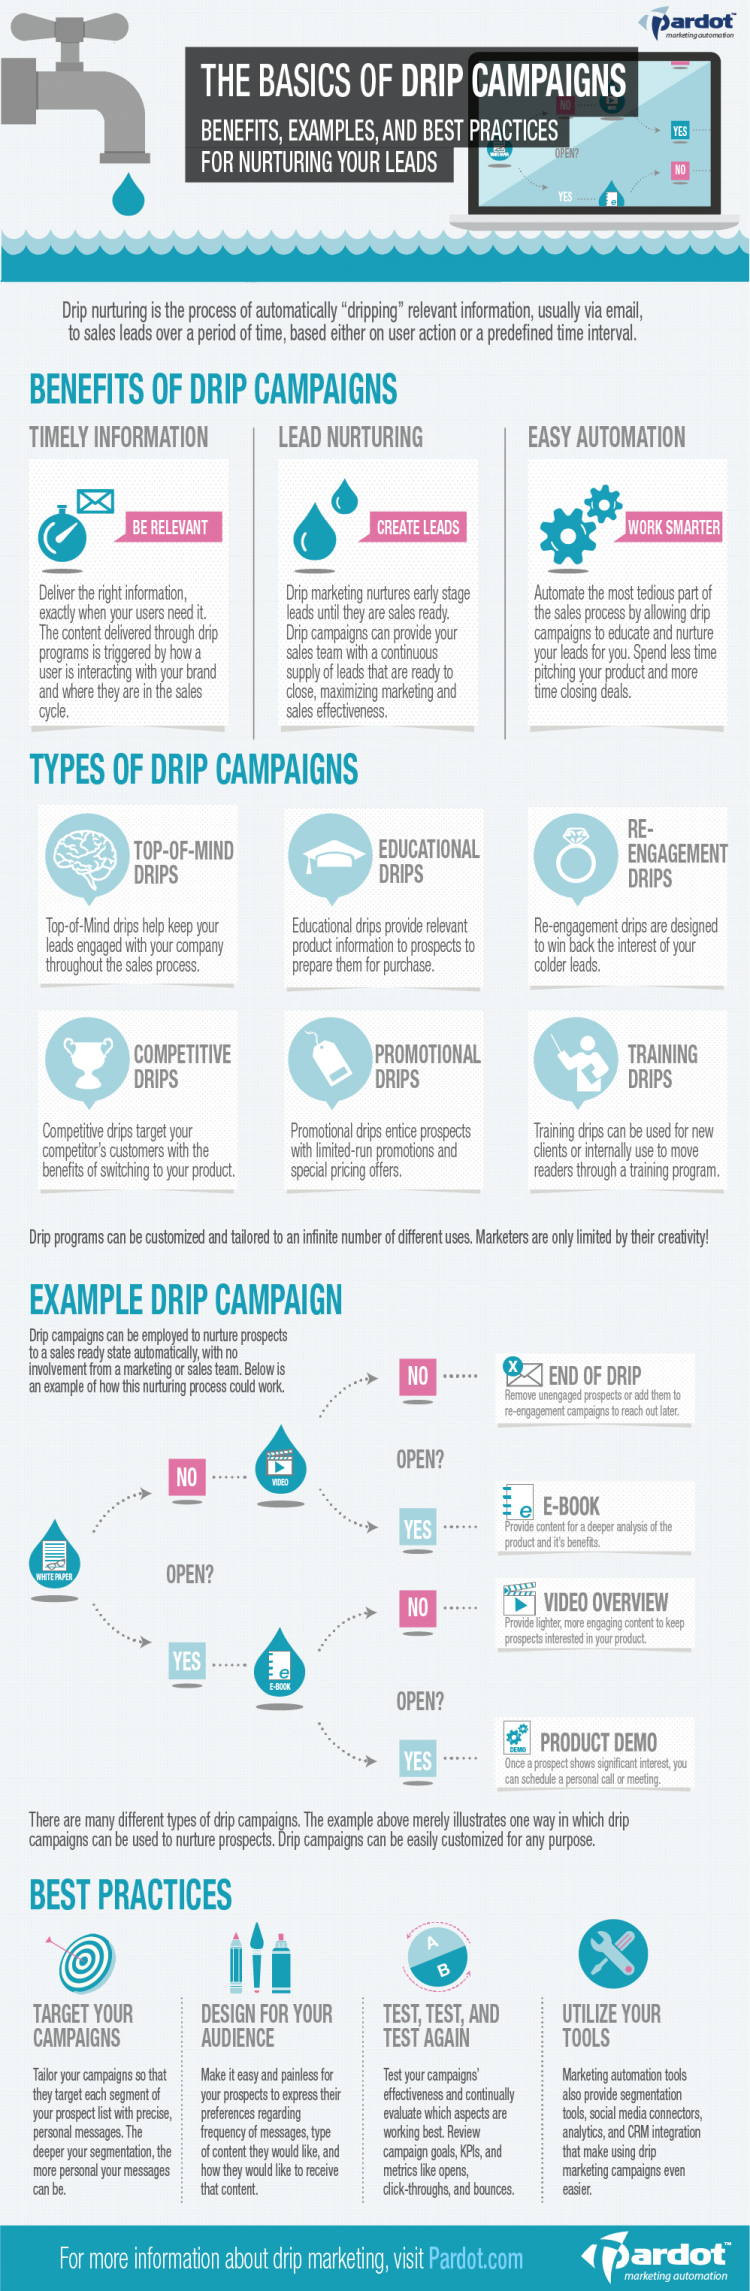 Drip Campaign Infographic from Pardot